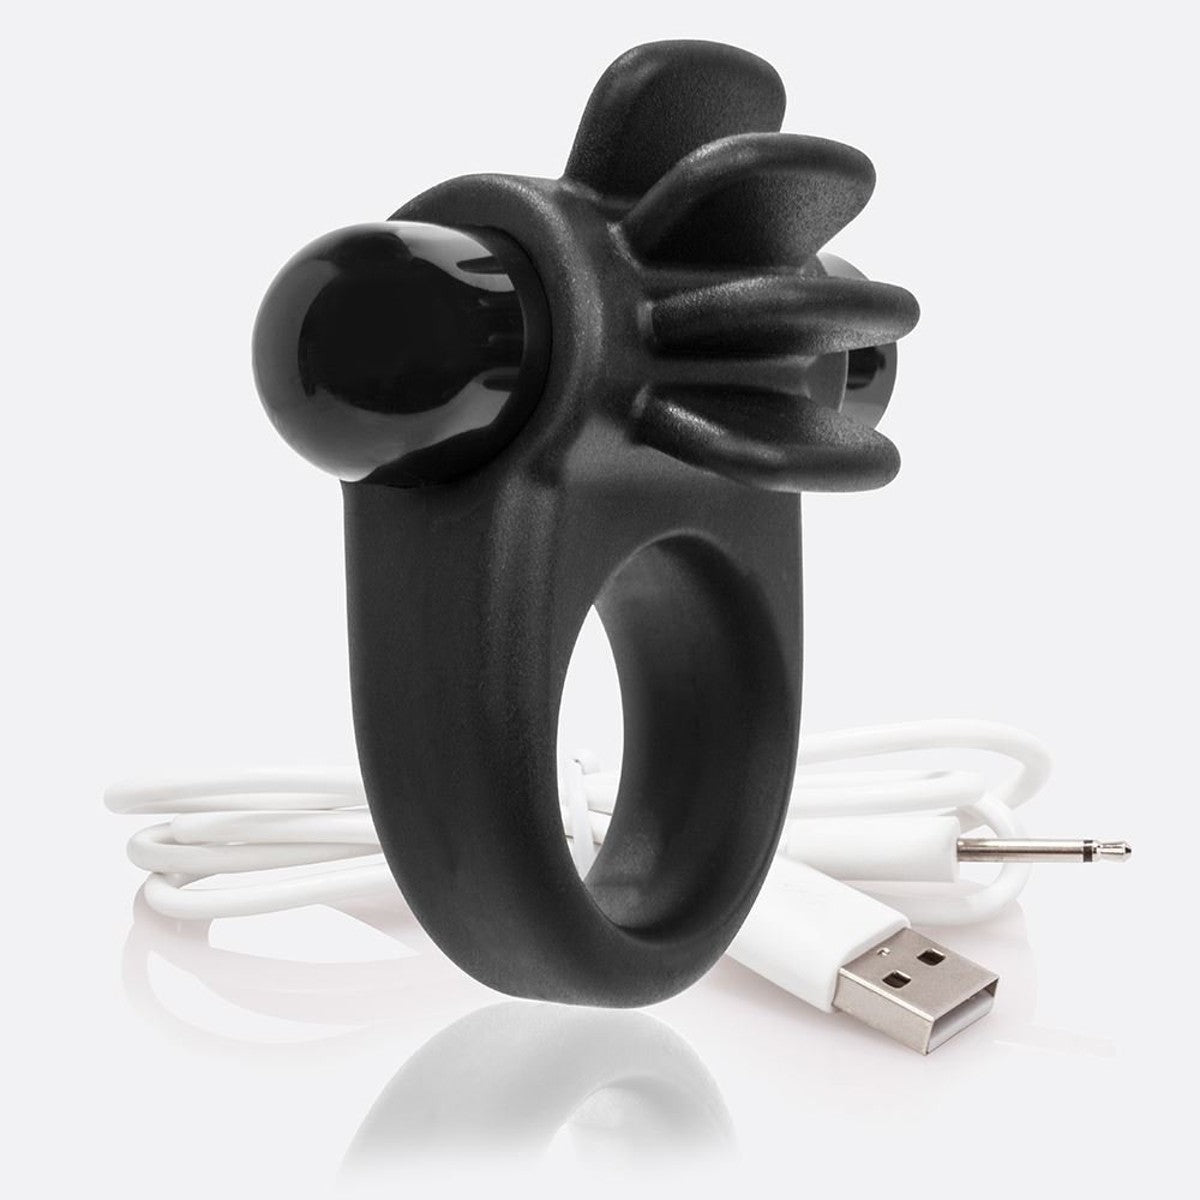 Featuring 10 vibrating functions, this silicone C-ring is designed to deliver an intense sexual experience!